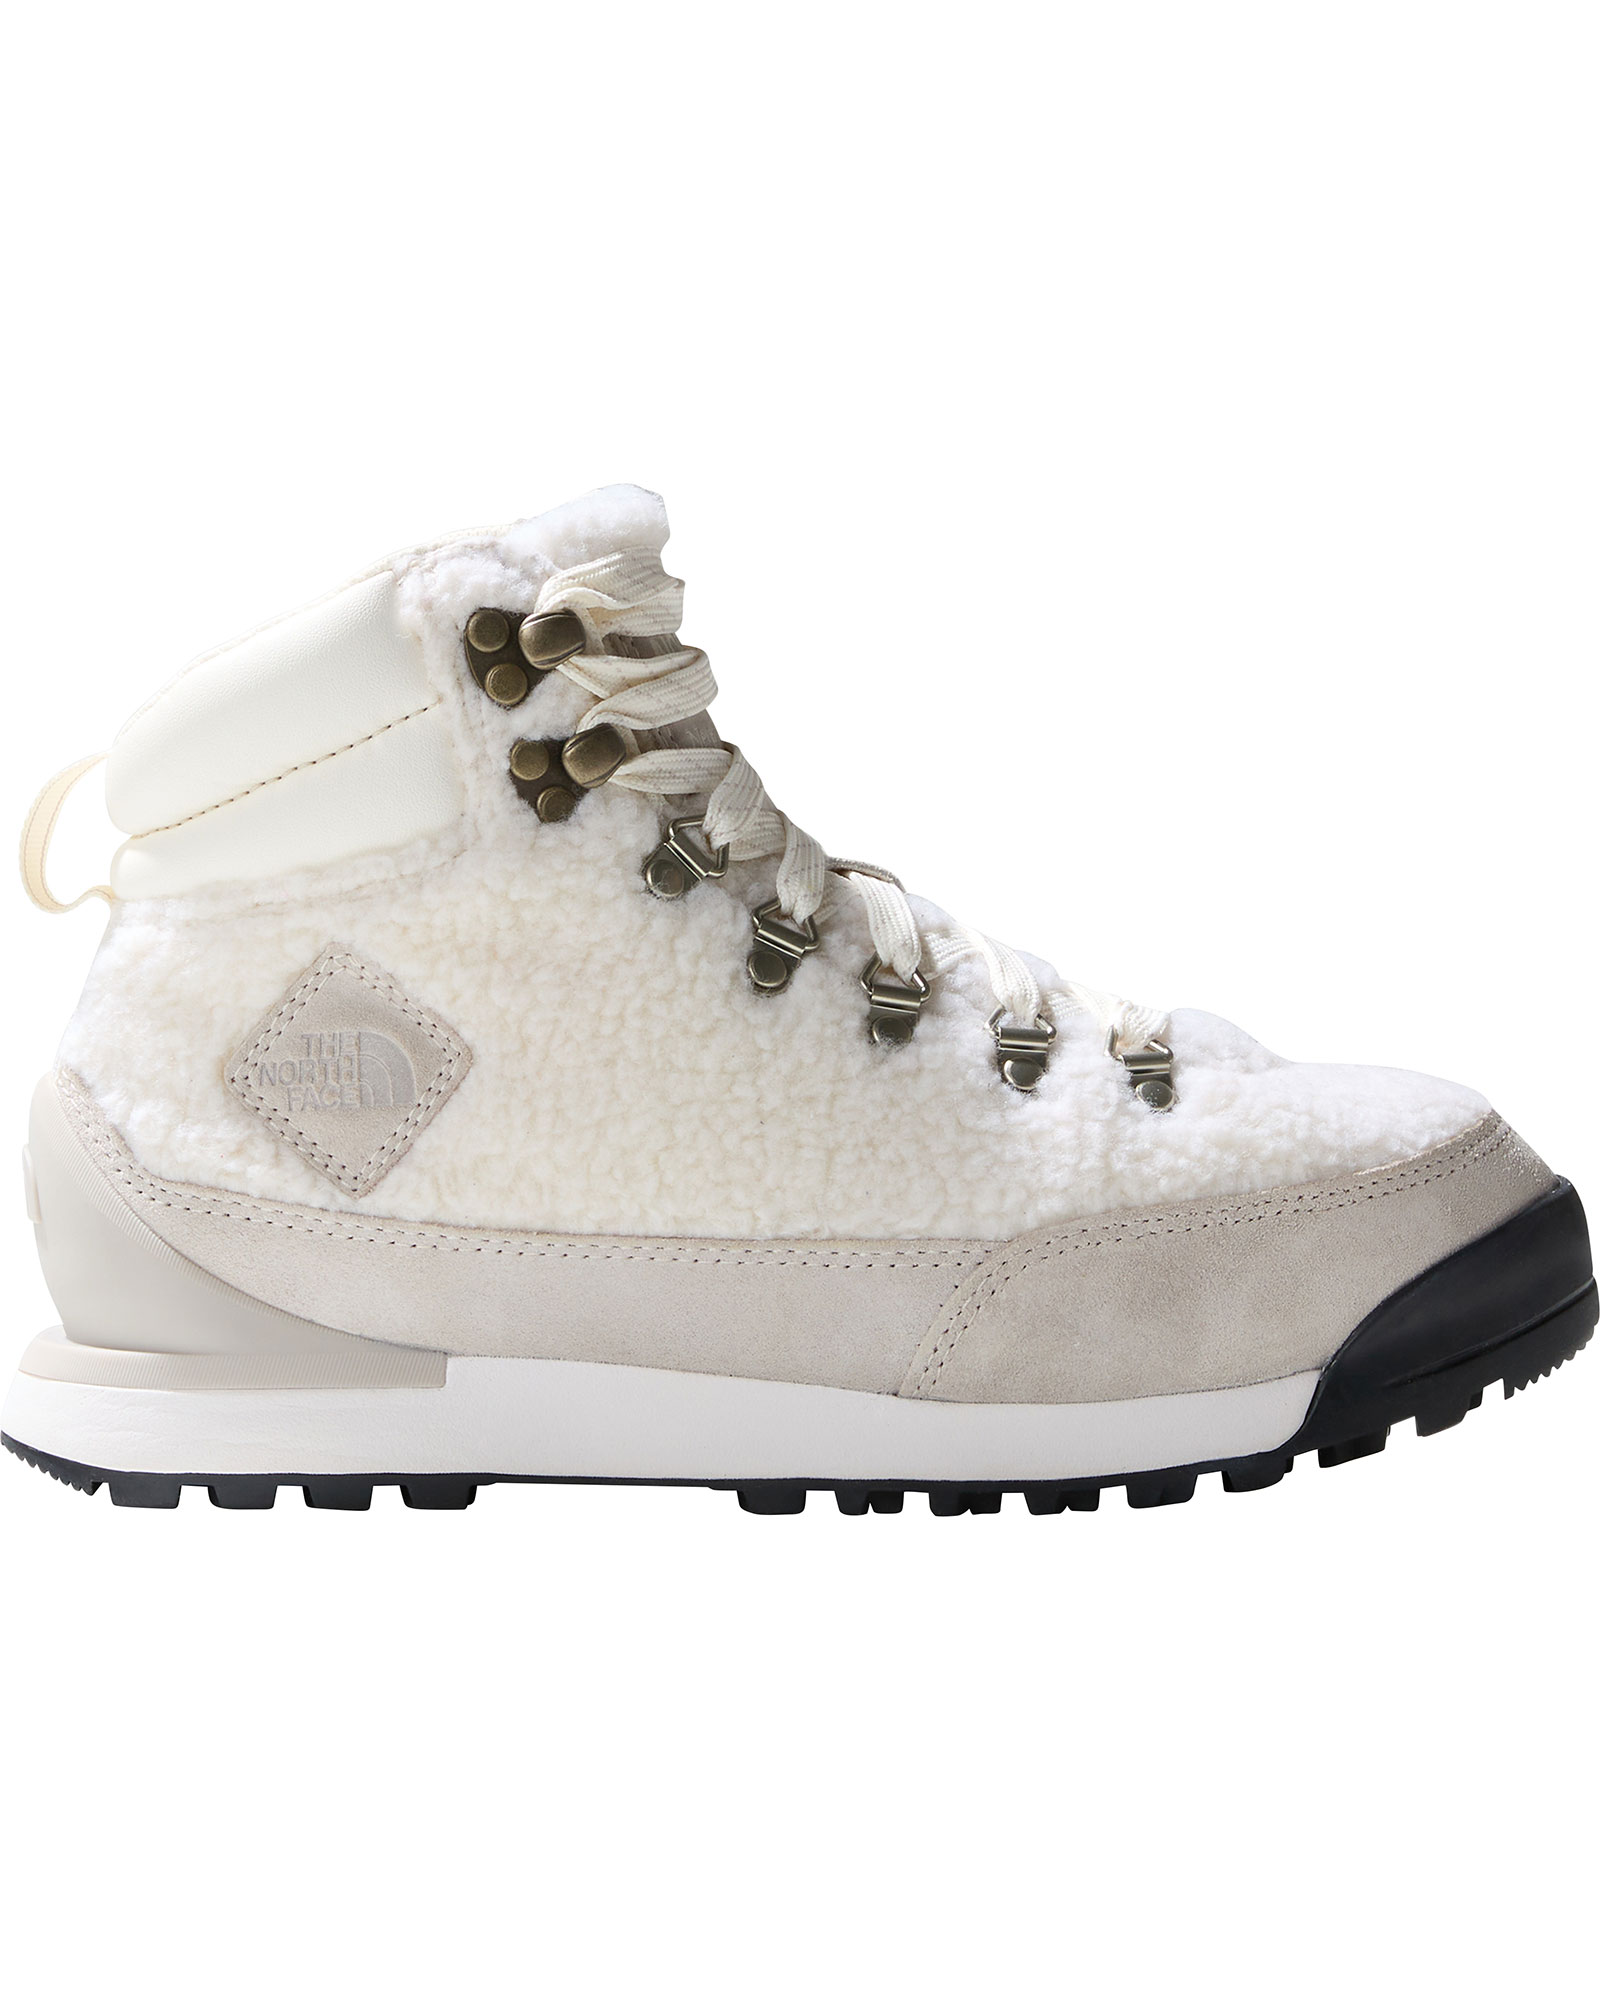 The North Face Back to Berkeley High Pile Women’s Boots - Gardenia White/Silver Grey UK 6